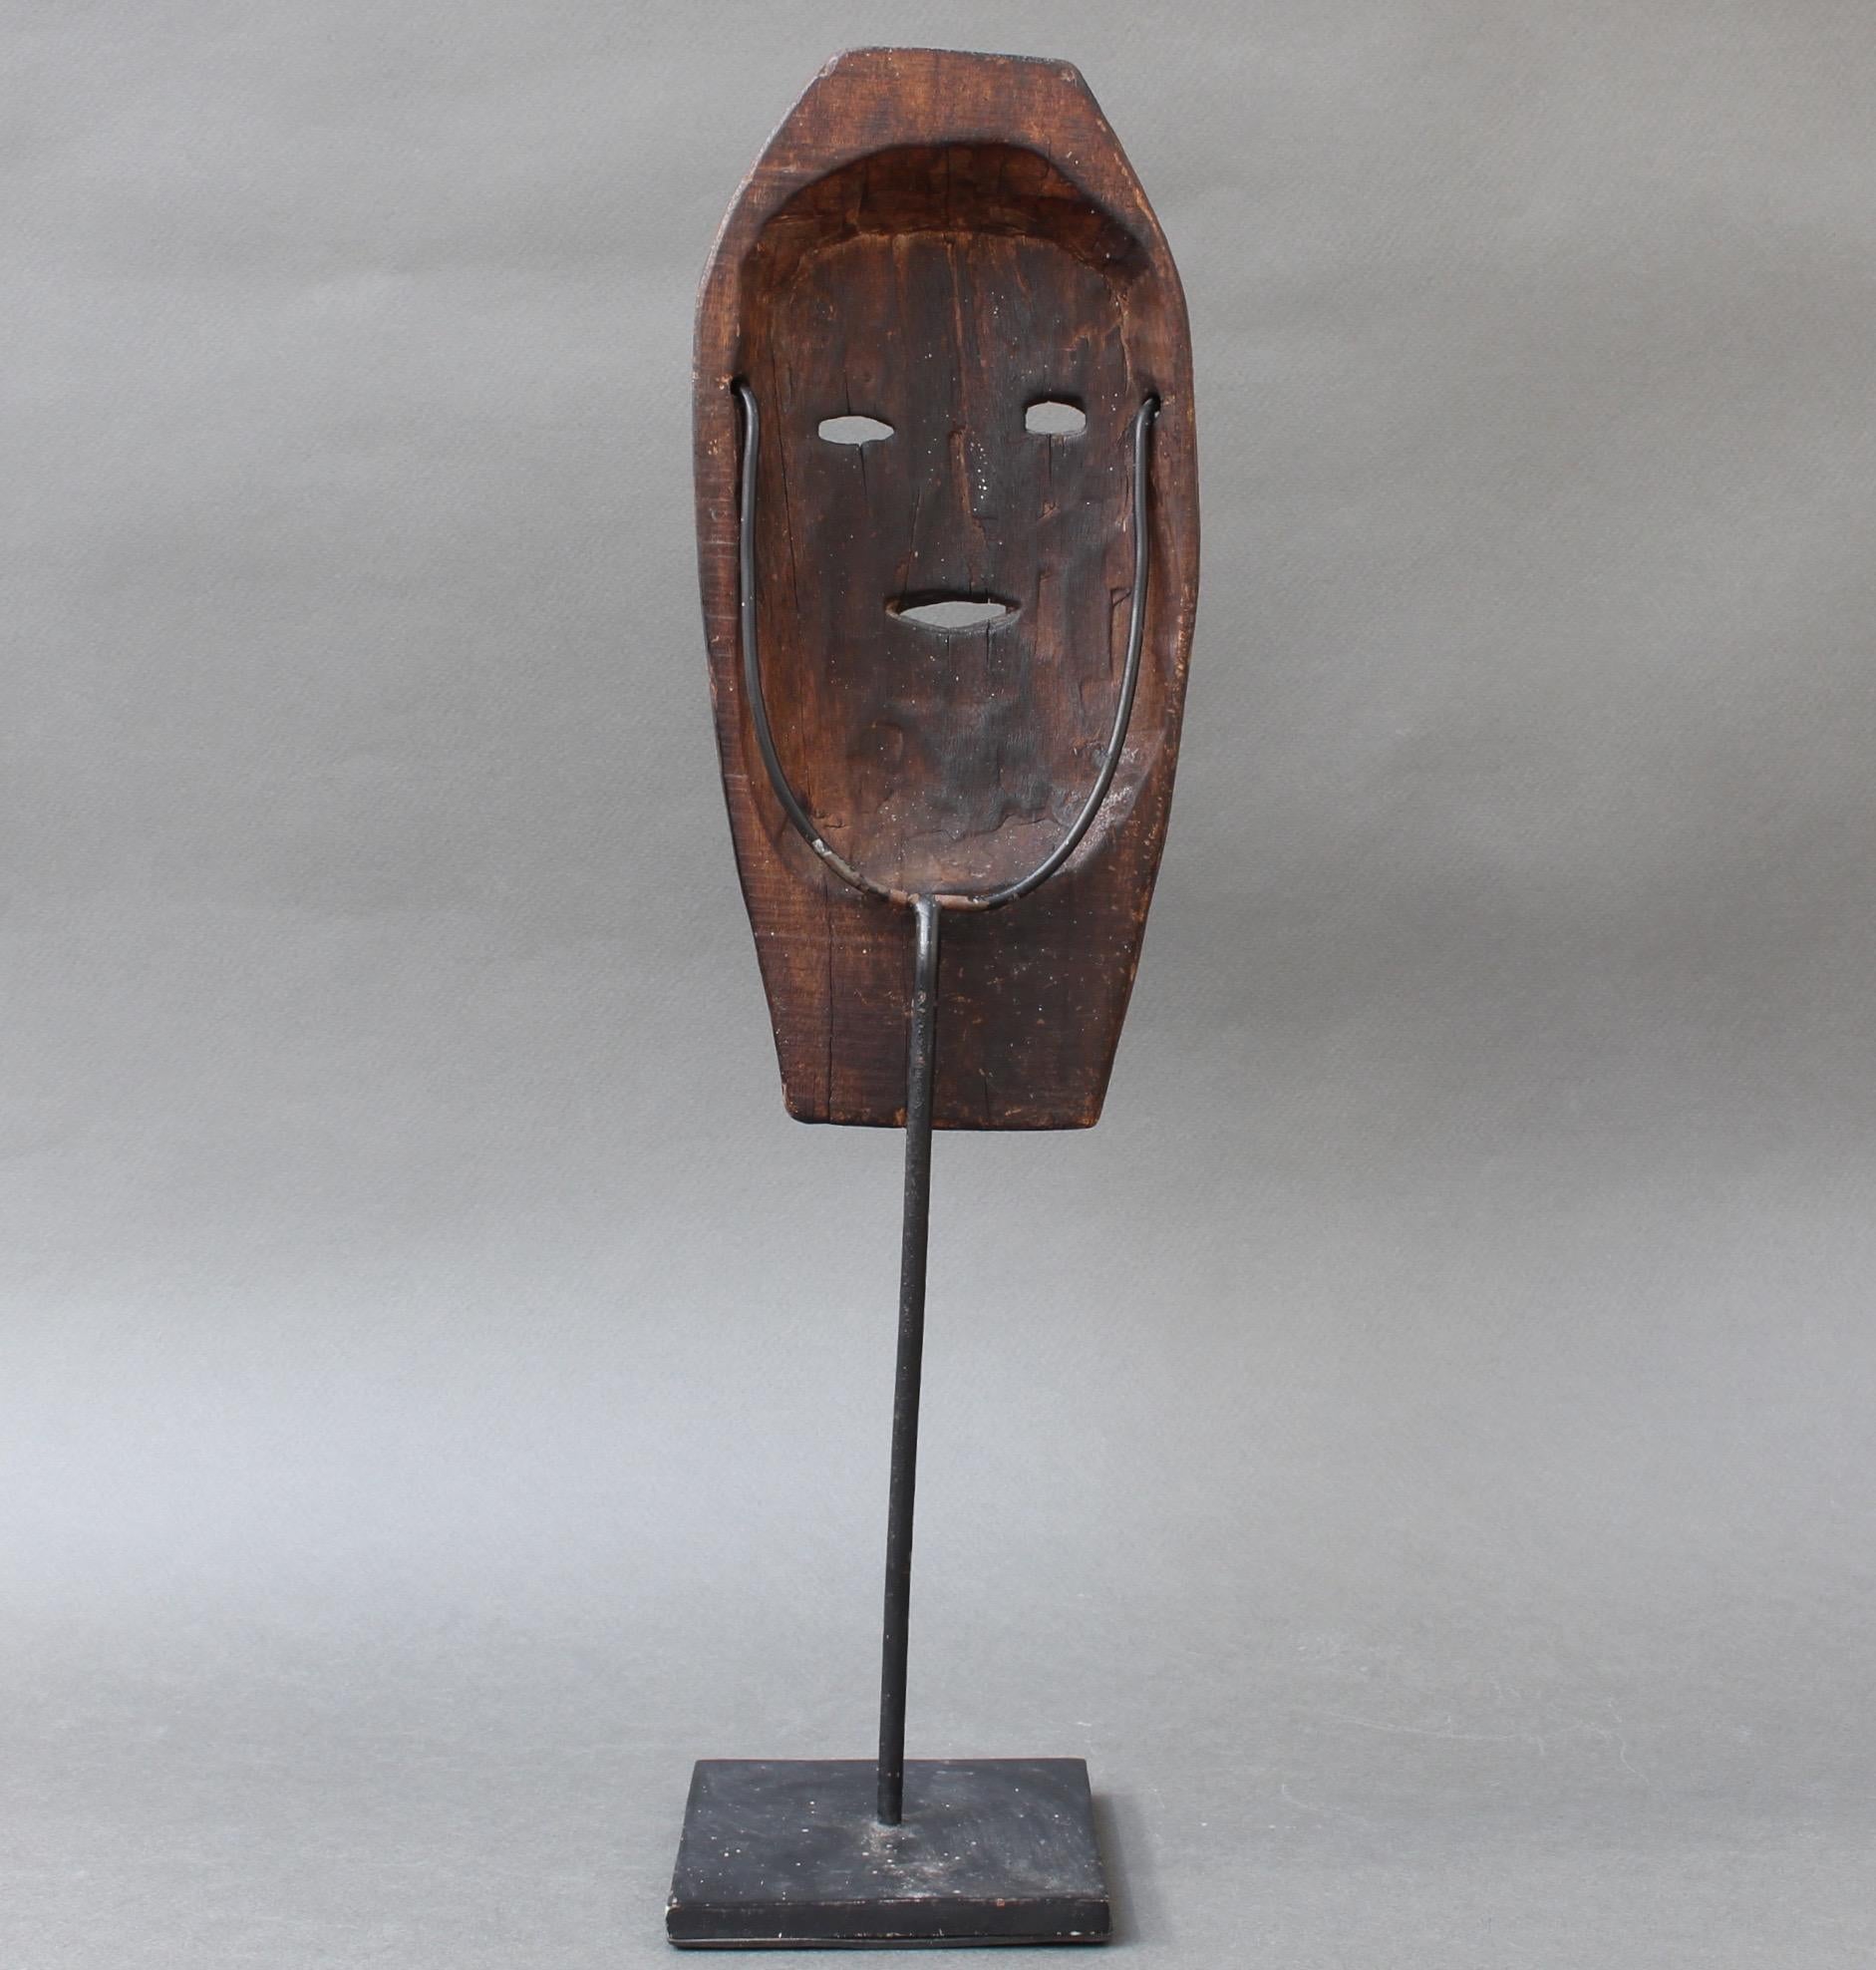 Hand-Carved Midcentury Sculpted Wooden Traditional Mask from Timor Island, Indonesia